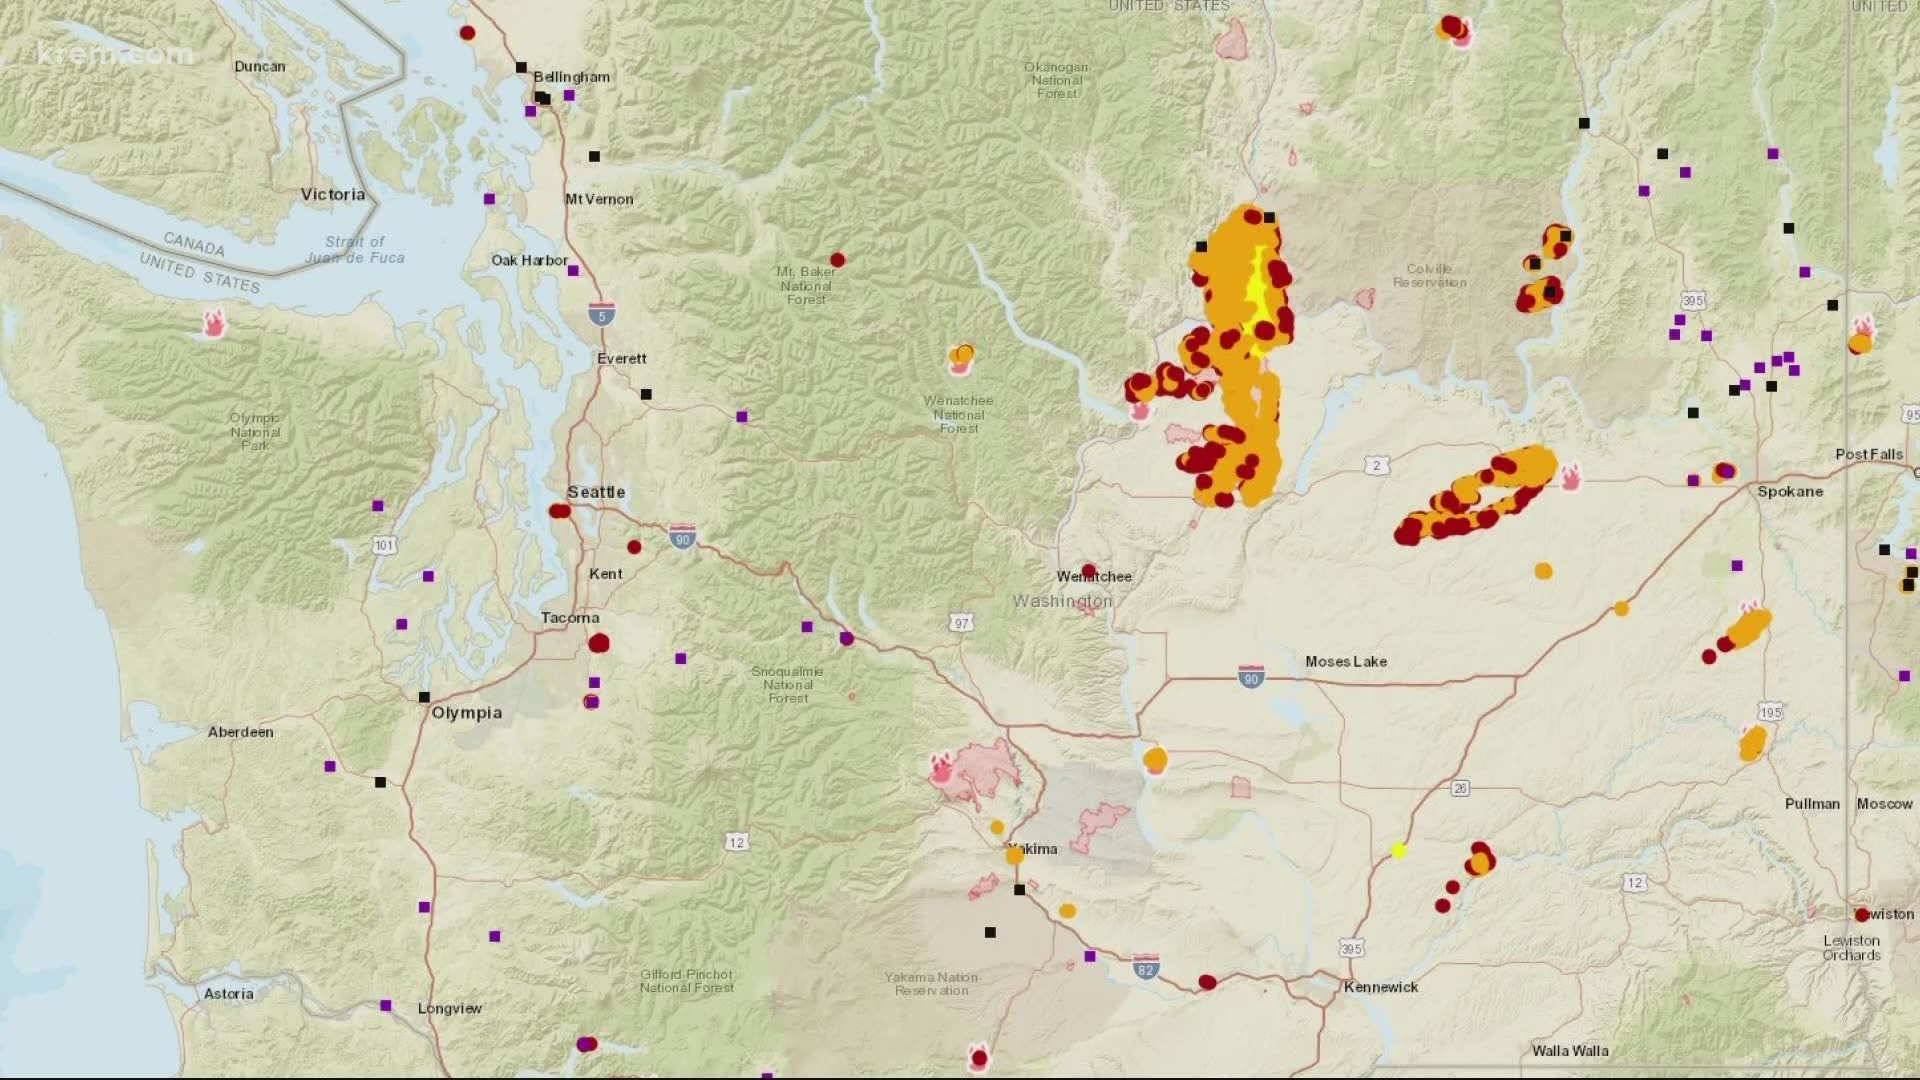 Map Washington State Wildfires At A Glance The Seattle Times